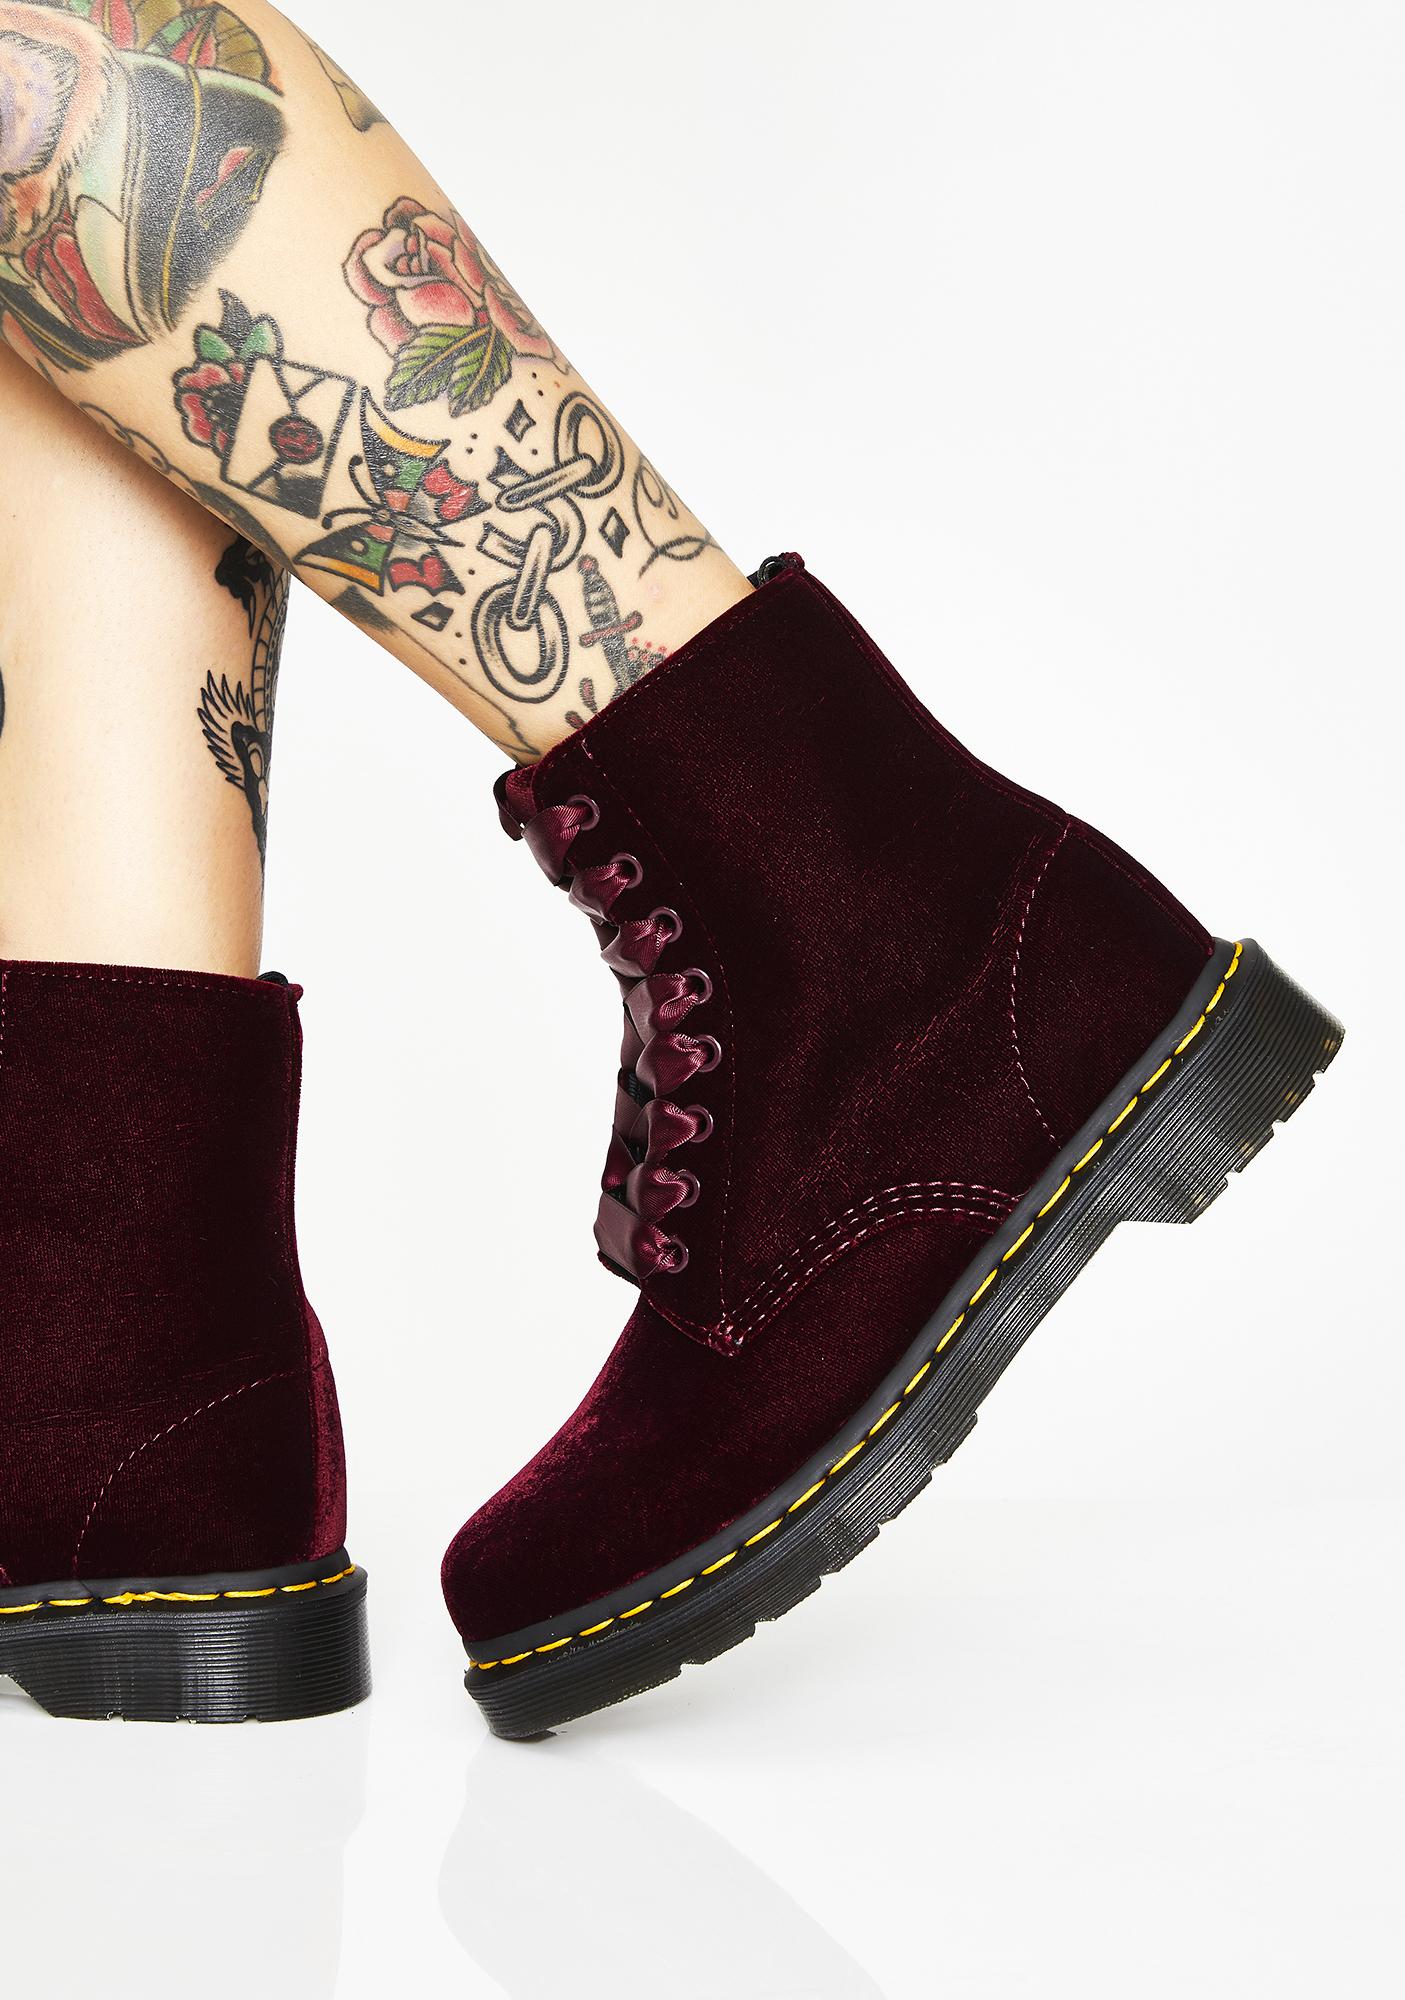 dr martens 1460 cherry red